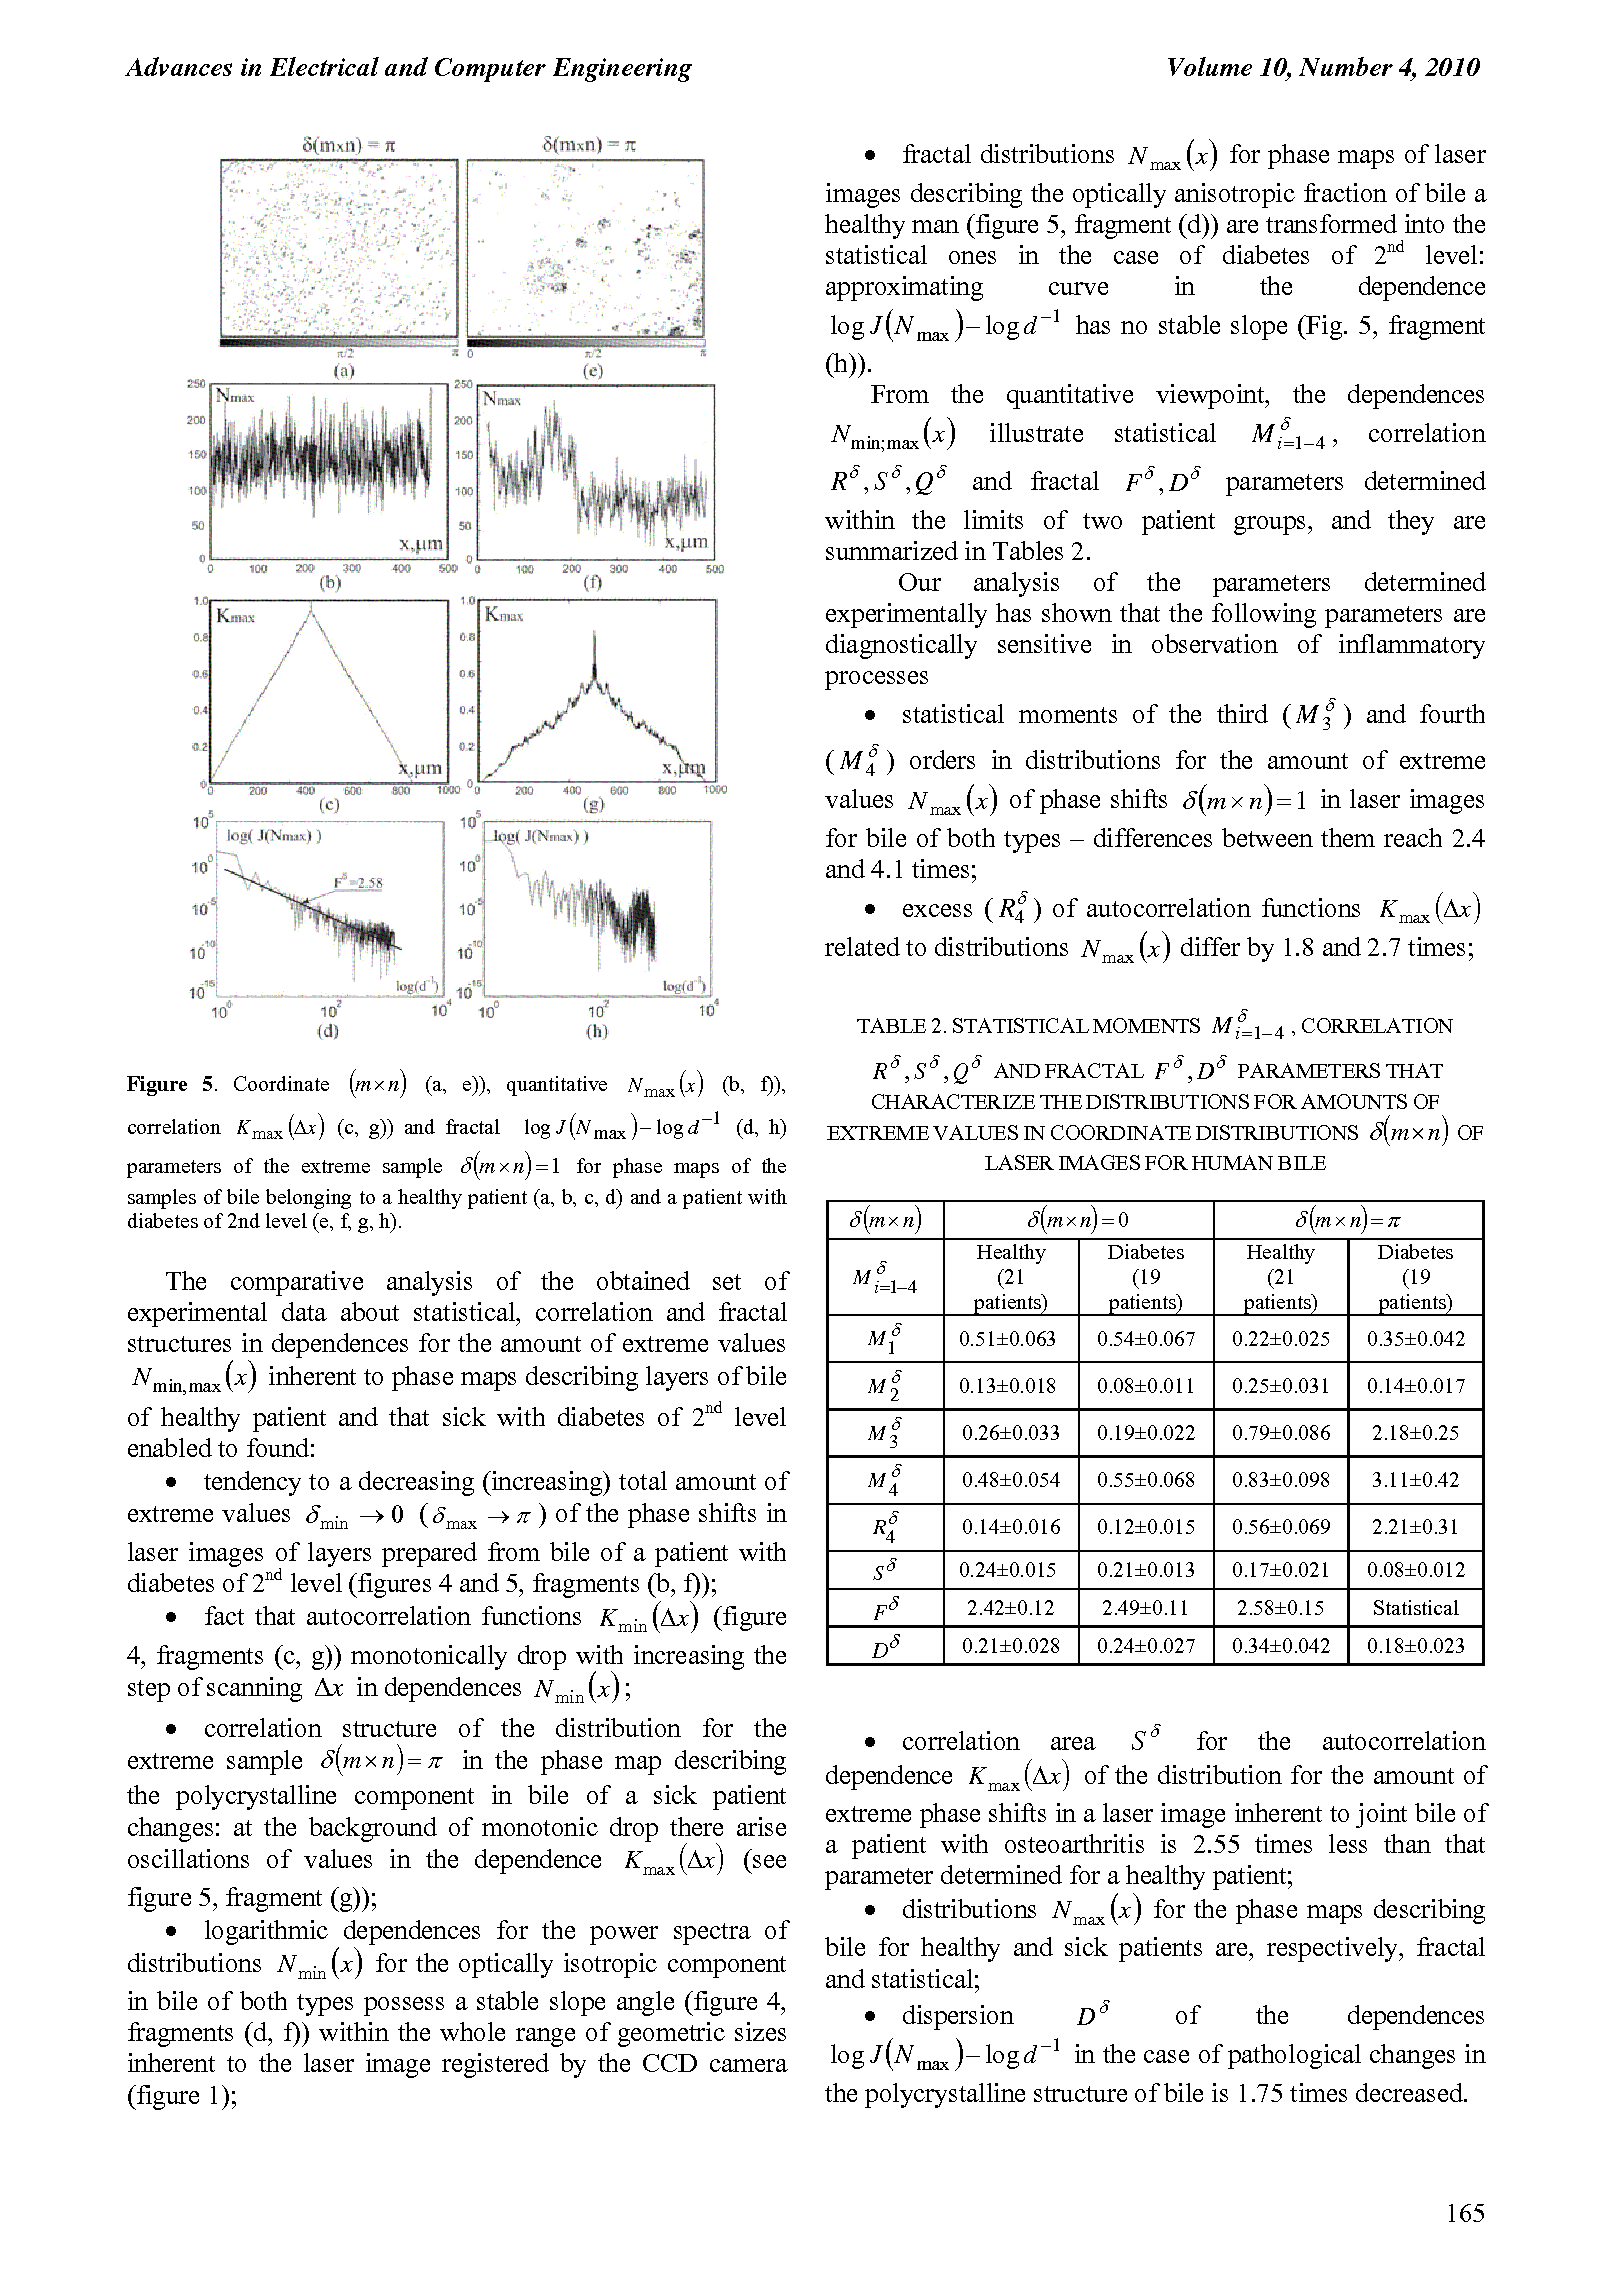 PDF Quickview for paper with DOI:10.4316/AECE.2010.04026